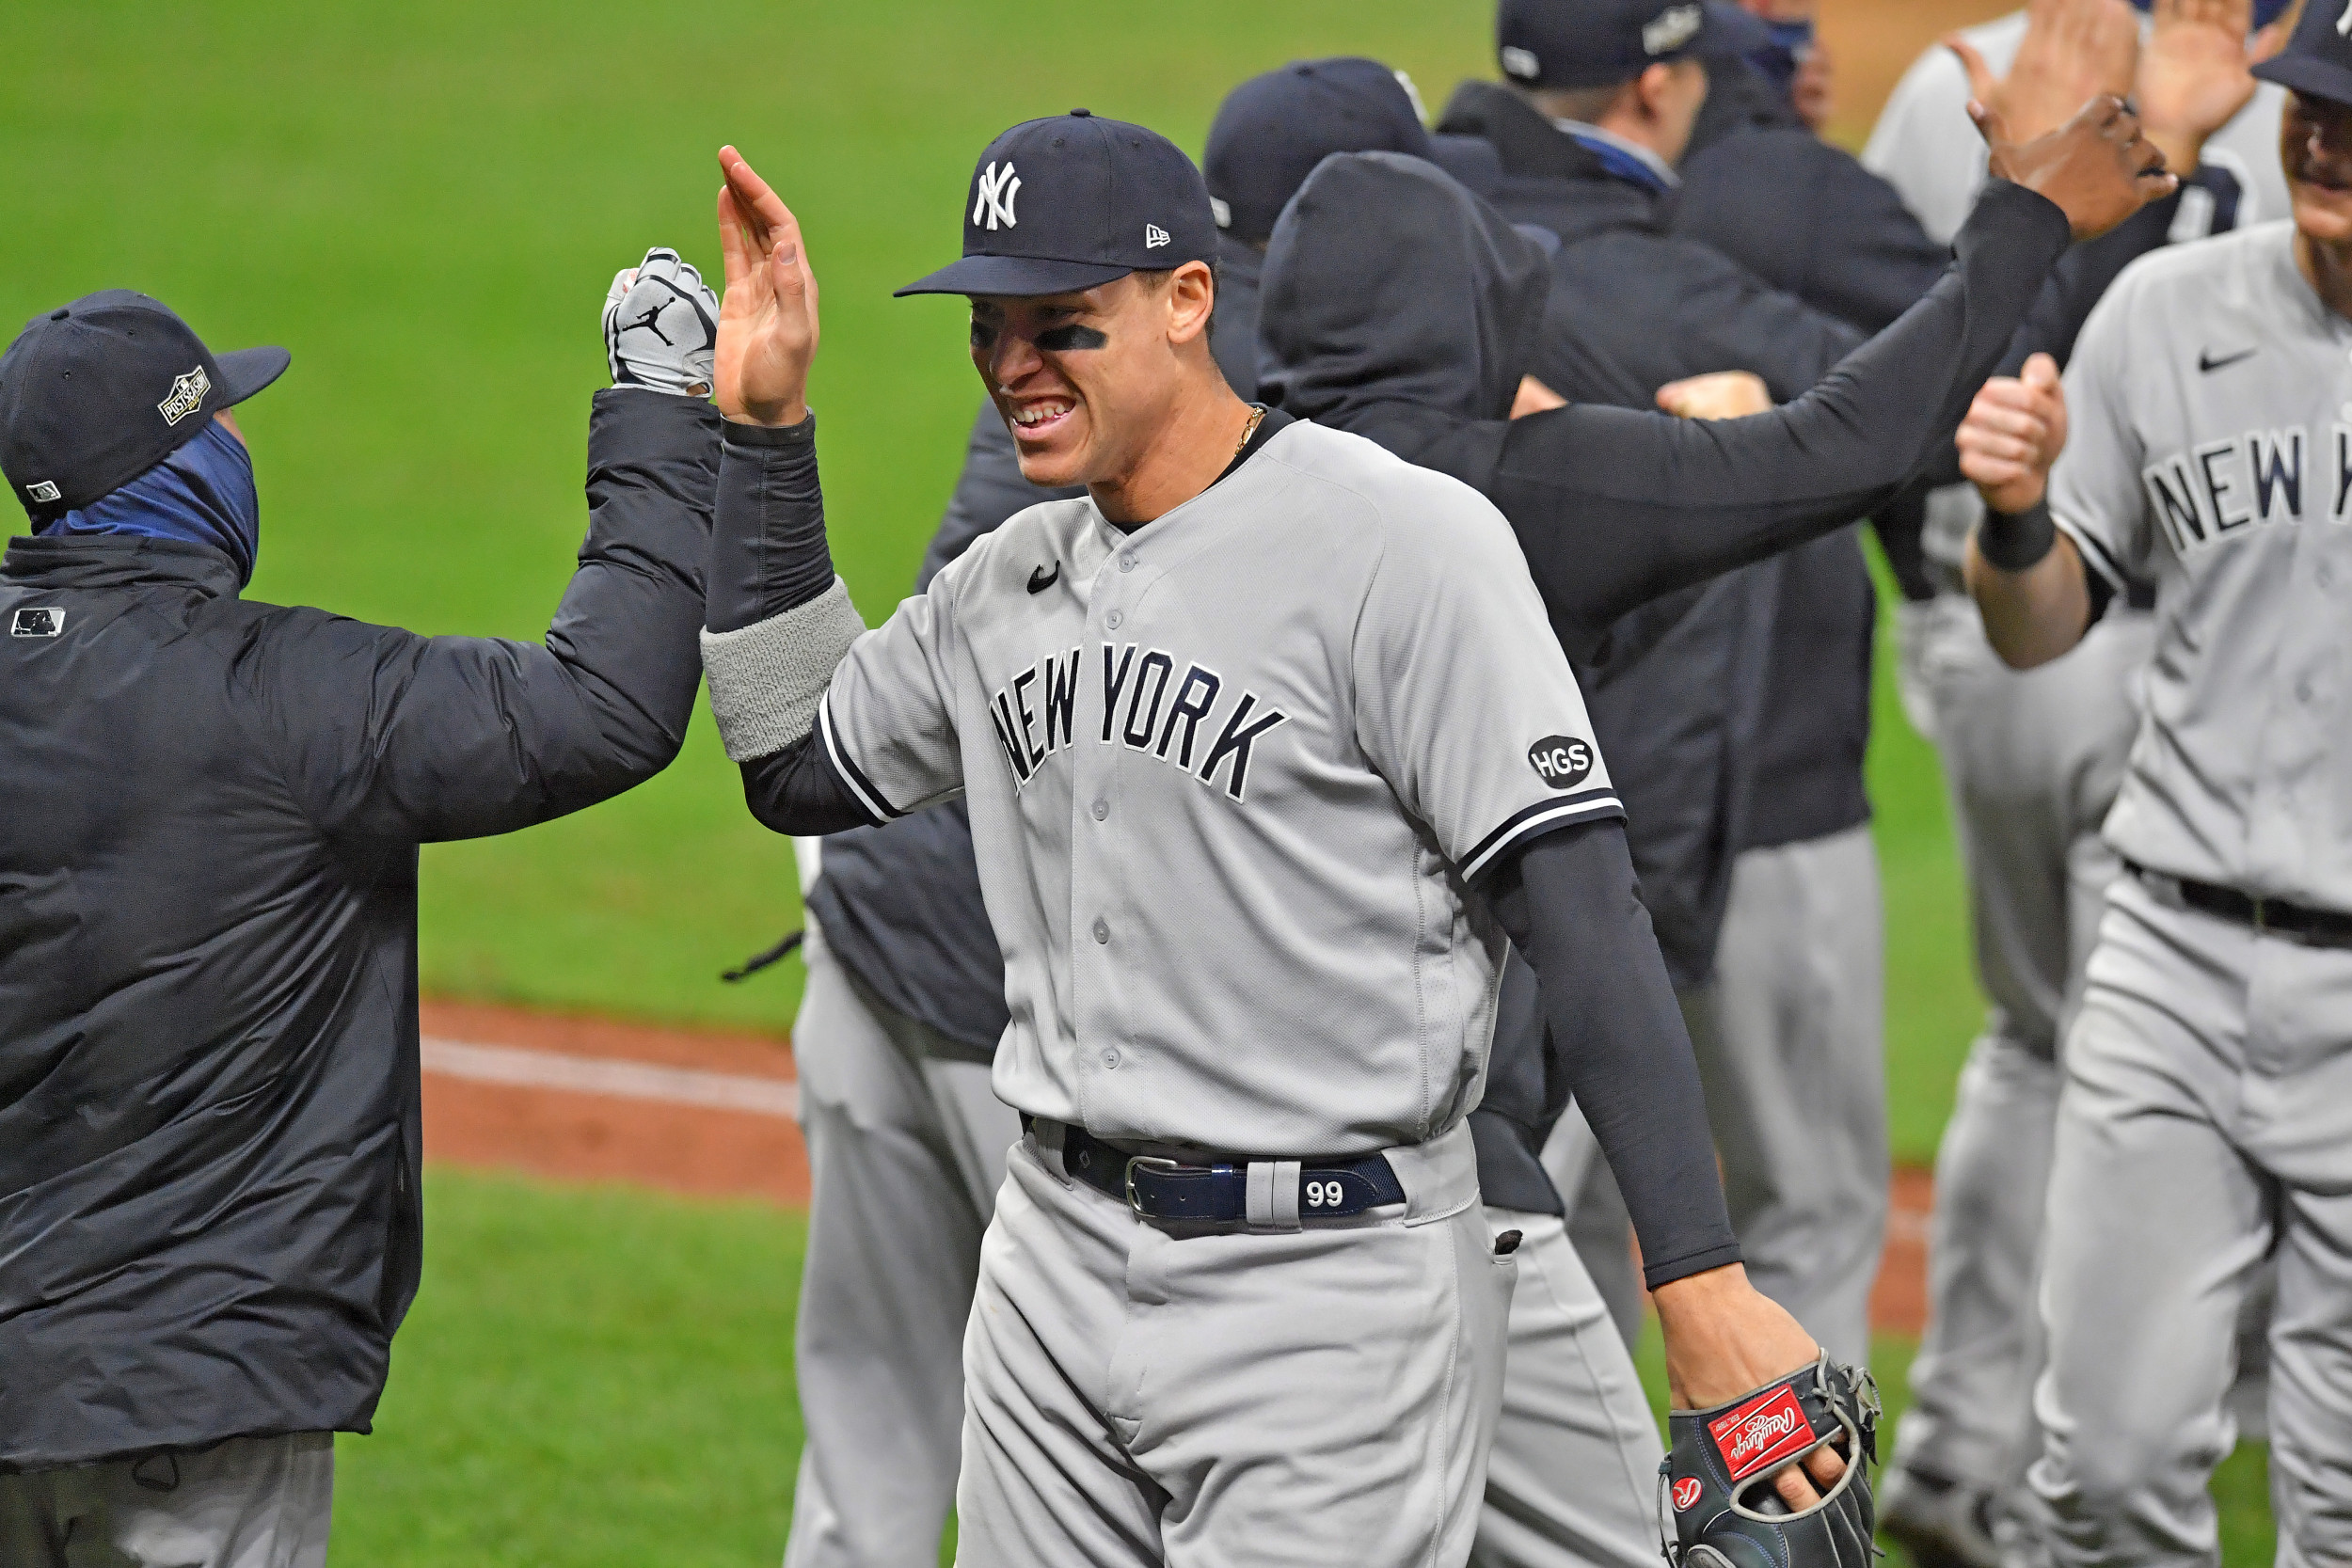 MLB Playoffs: New York Yankees vs. Cleveland Indians Wild Card preview